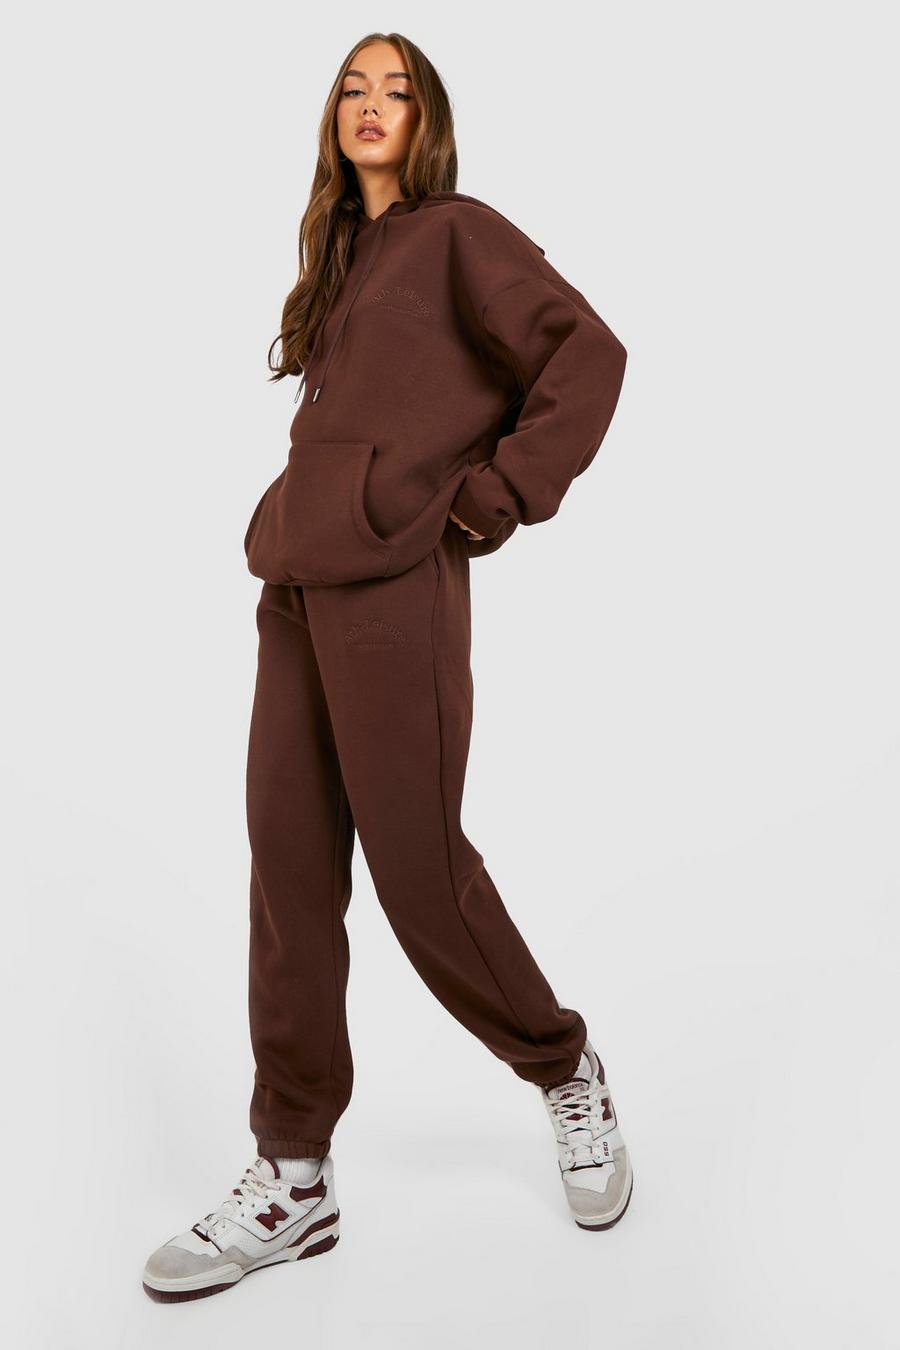 Women's Ath Leisure Embroidered Hooded Tracksuit | Boohoo UK